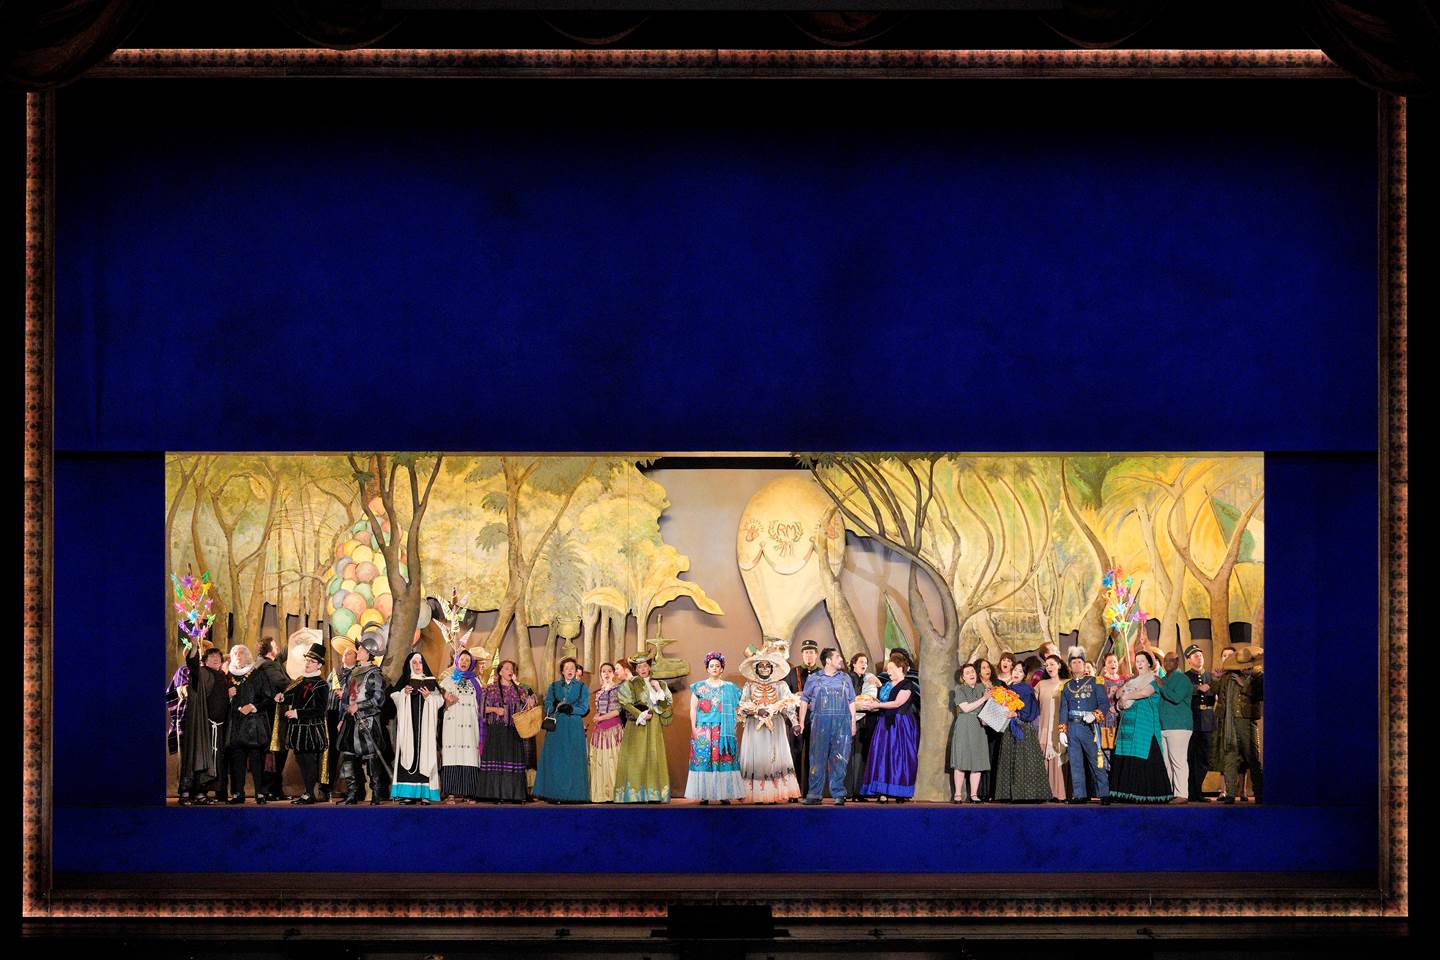 Scene from Frida A group of people standing on stage in front of a painting of a forest